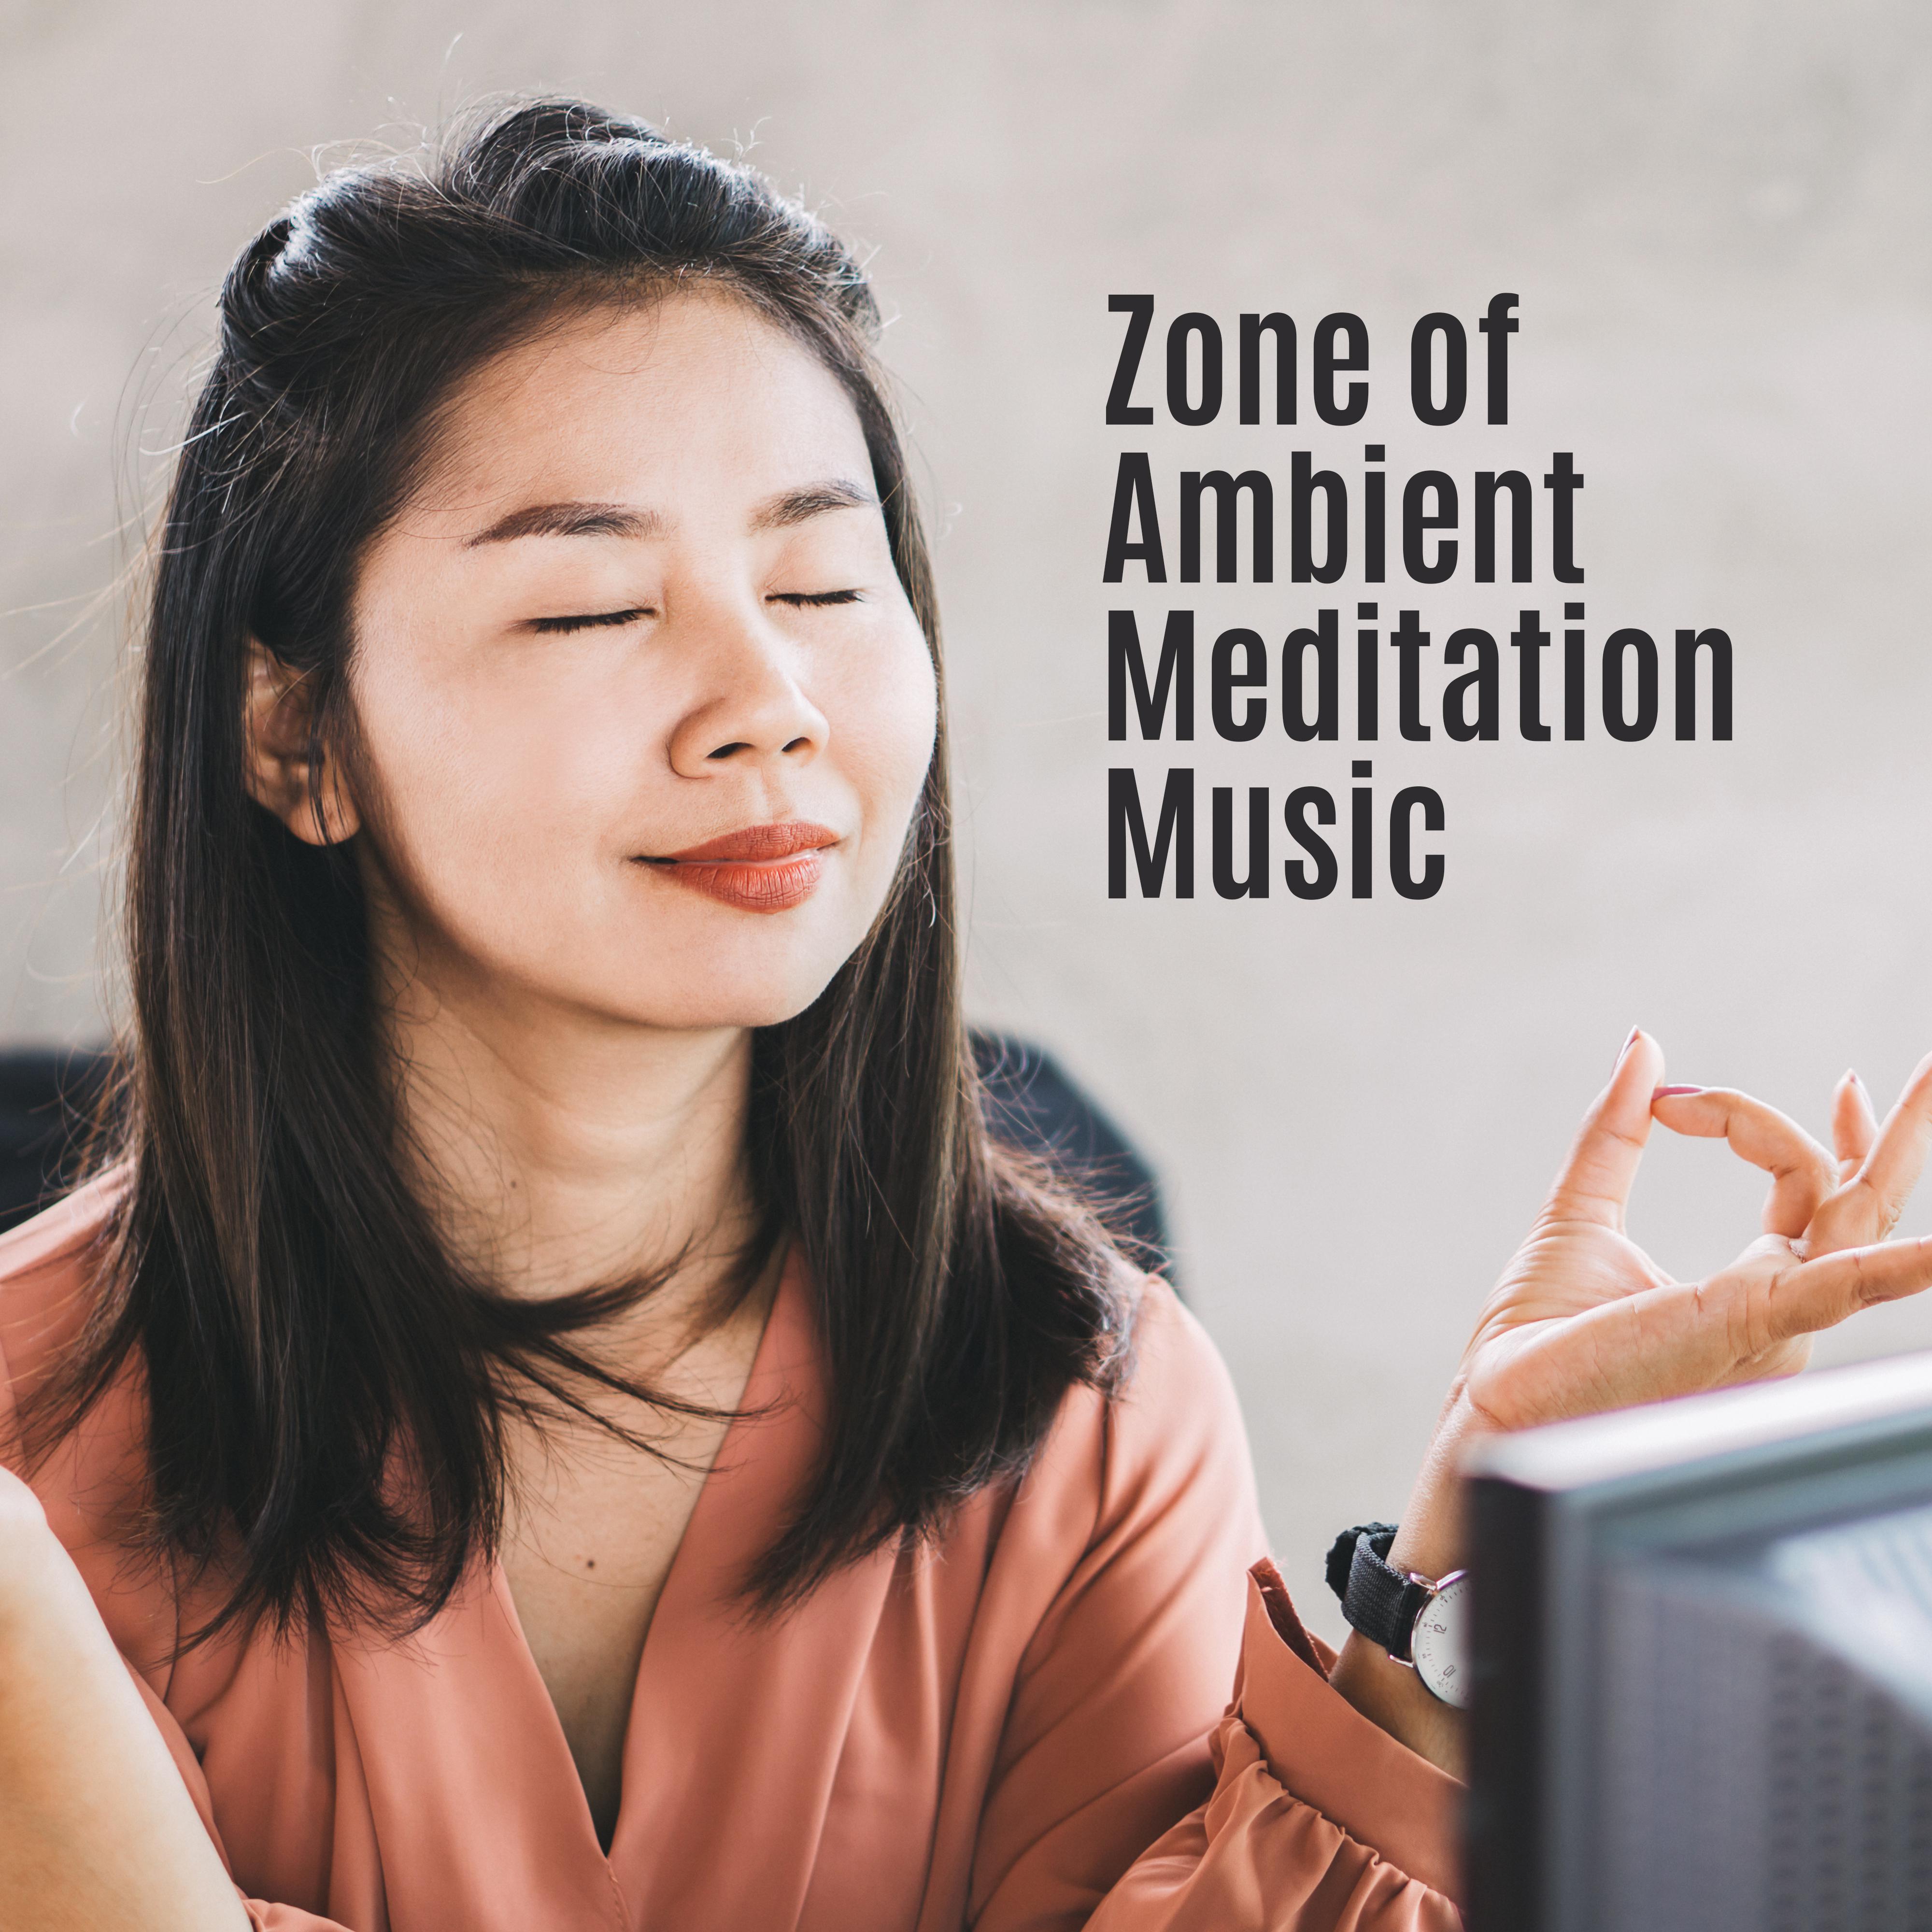 Zone of Ambient Meditation Music: 2019 Deep Ambient New Age Music Compilation for Meditation & Mind Relaxation, Healing Yoga, Body & Soul Deeper Connection